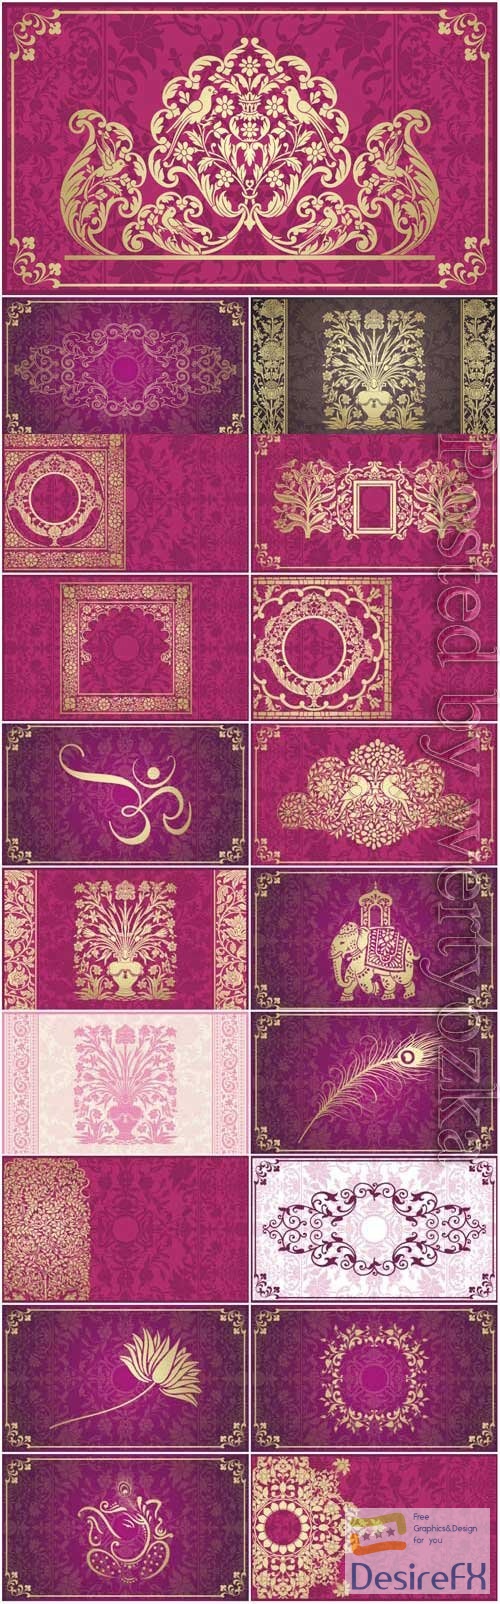 Pink indian backgrounds with gold ornaments in vector